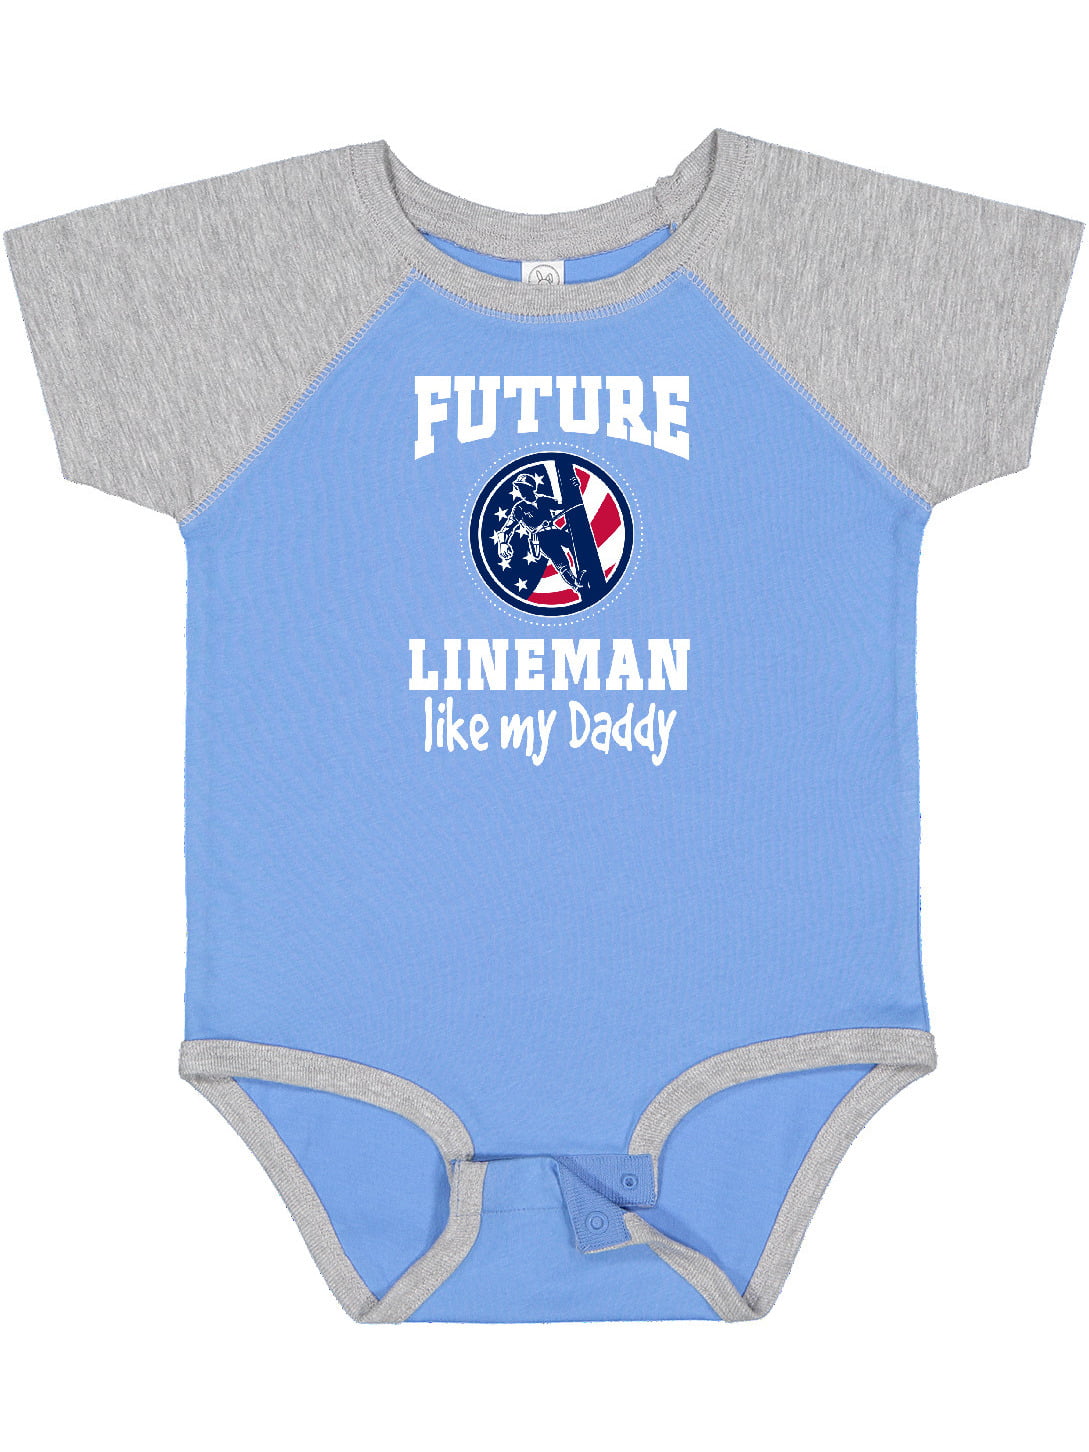 American Lineman Design On The Back Baby Outfit Short Sleeves Bodysuits